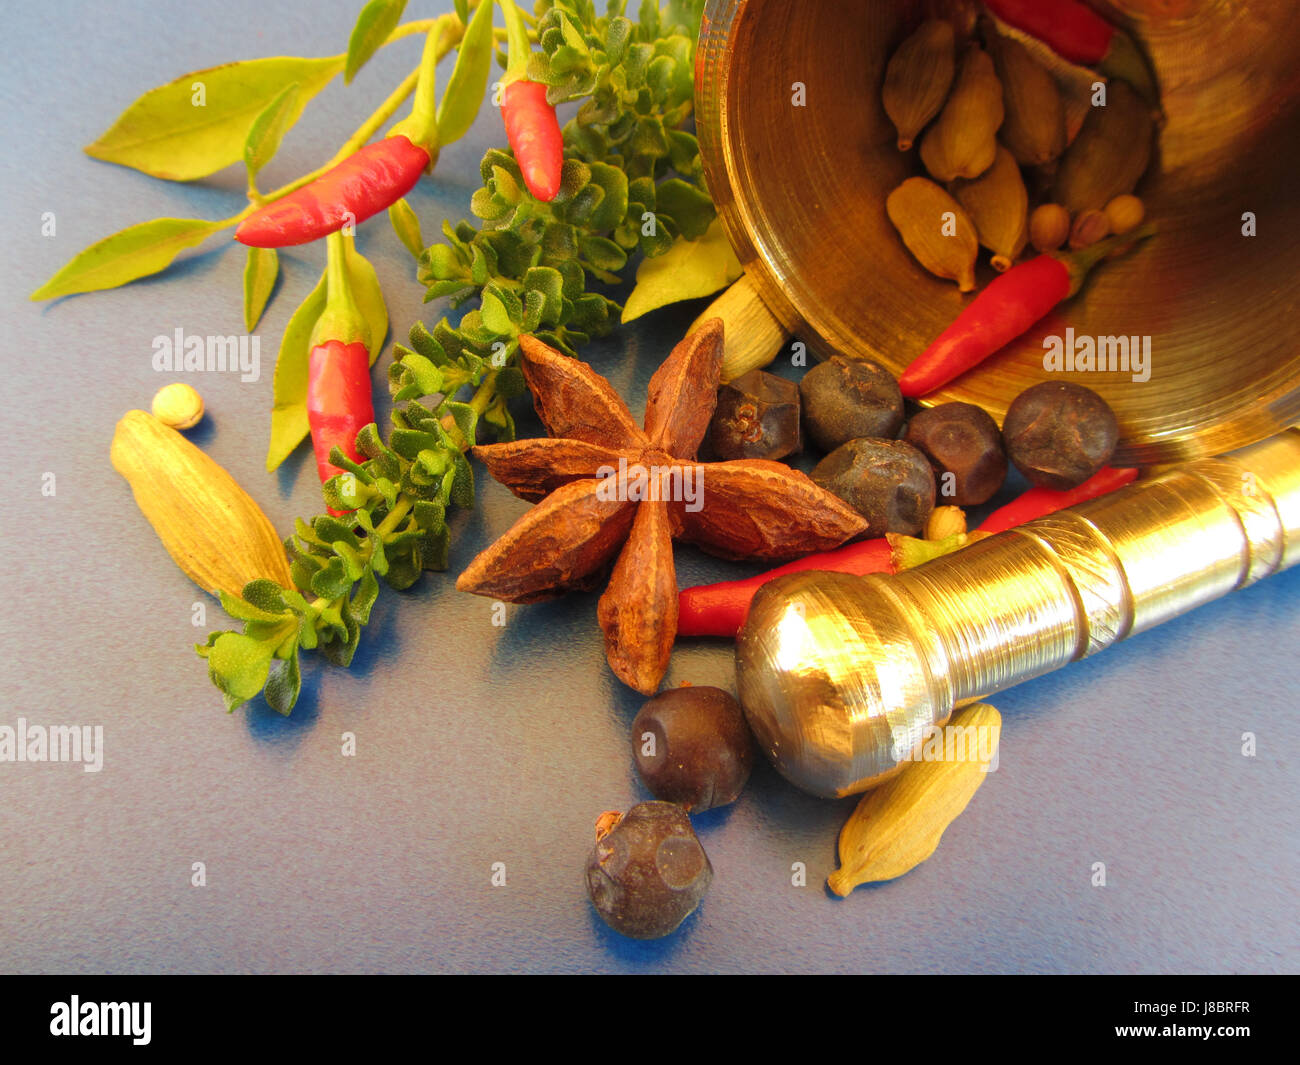 flavour, red peppers, grind, mortar, mint, juniper, chilli, chili, food, Stock Photo